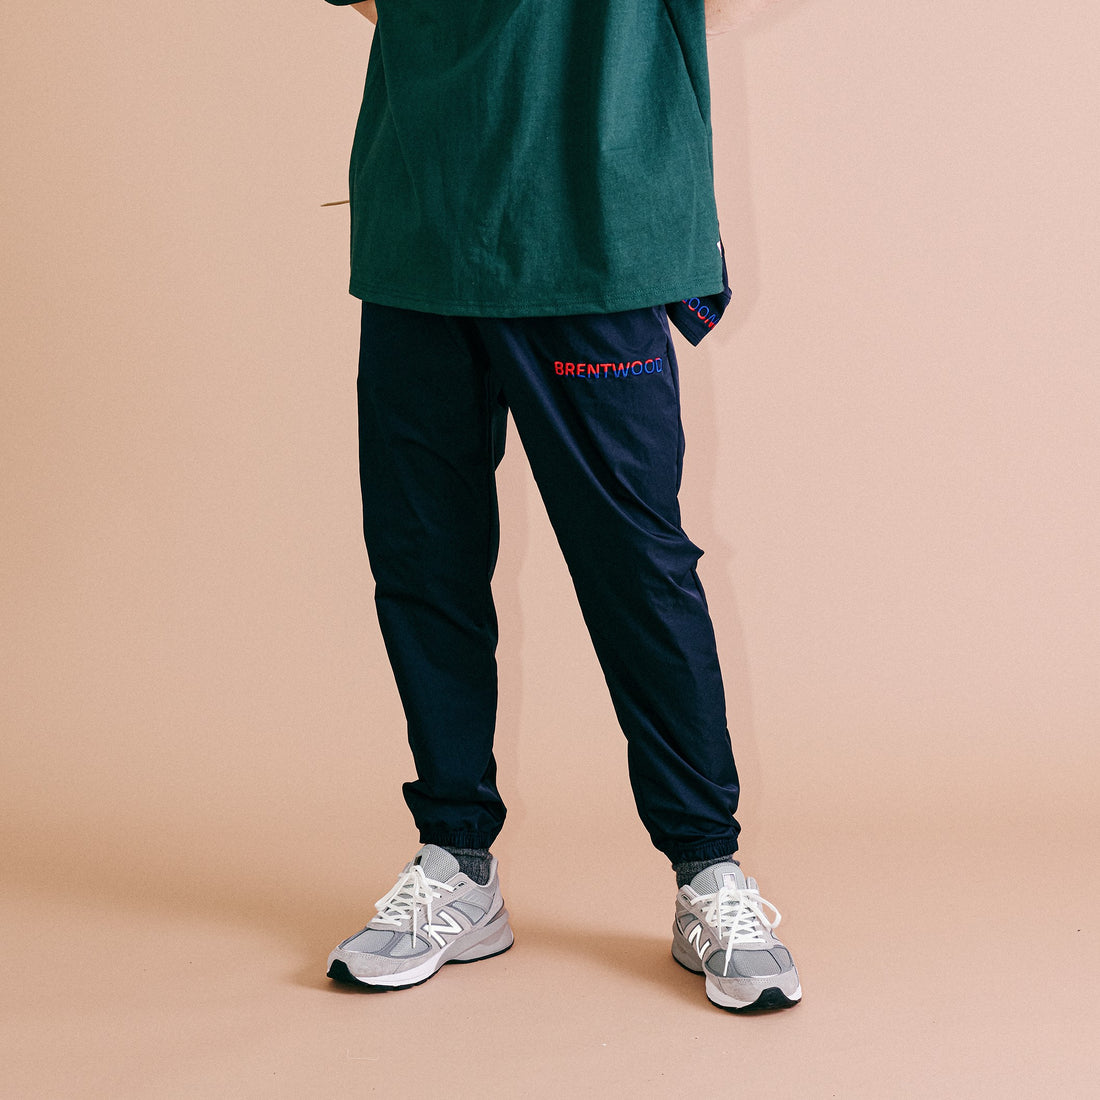 【New Release】Brentwood Athletic Pants